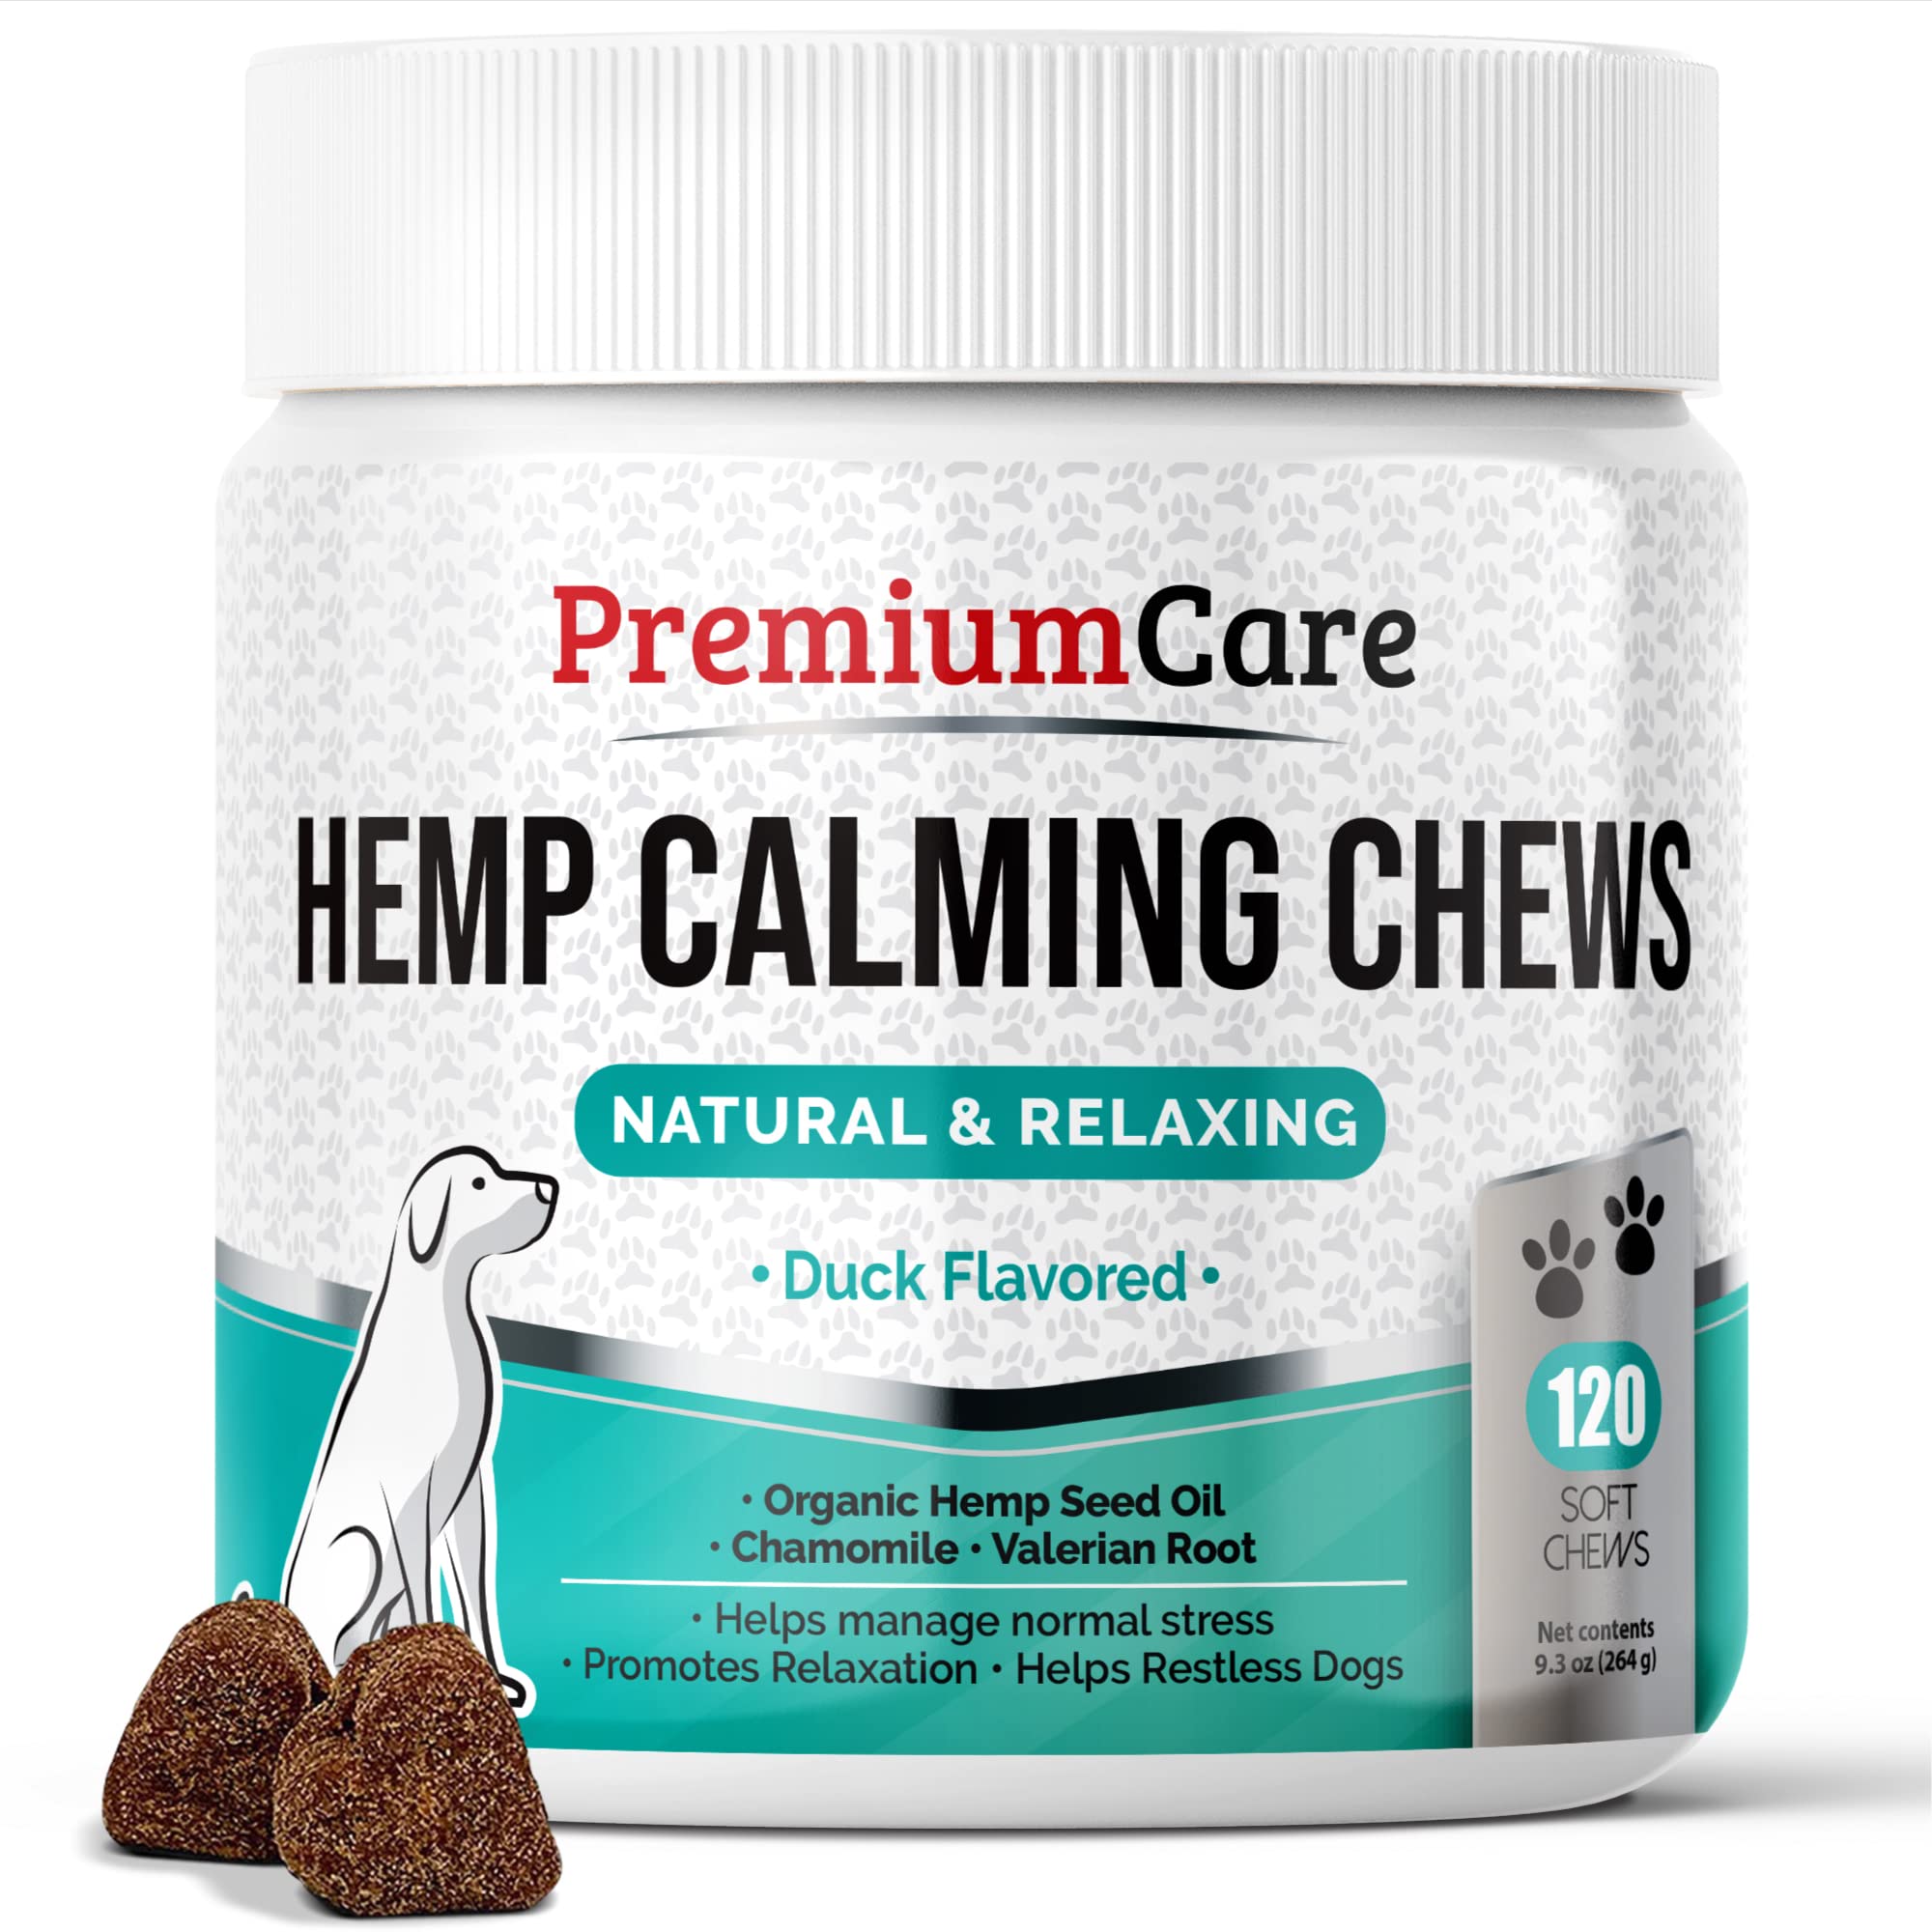 Premium Care Hemp Calming Chews For Dogs, Made In Usa, Helps With Dog Anxiety, Separation, Barking, Stress Relief, 9.3 Oz (264G)